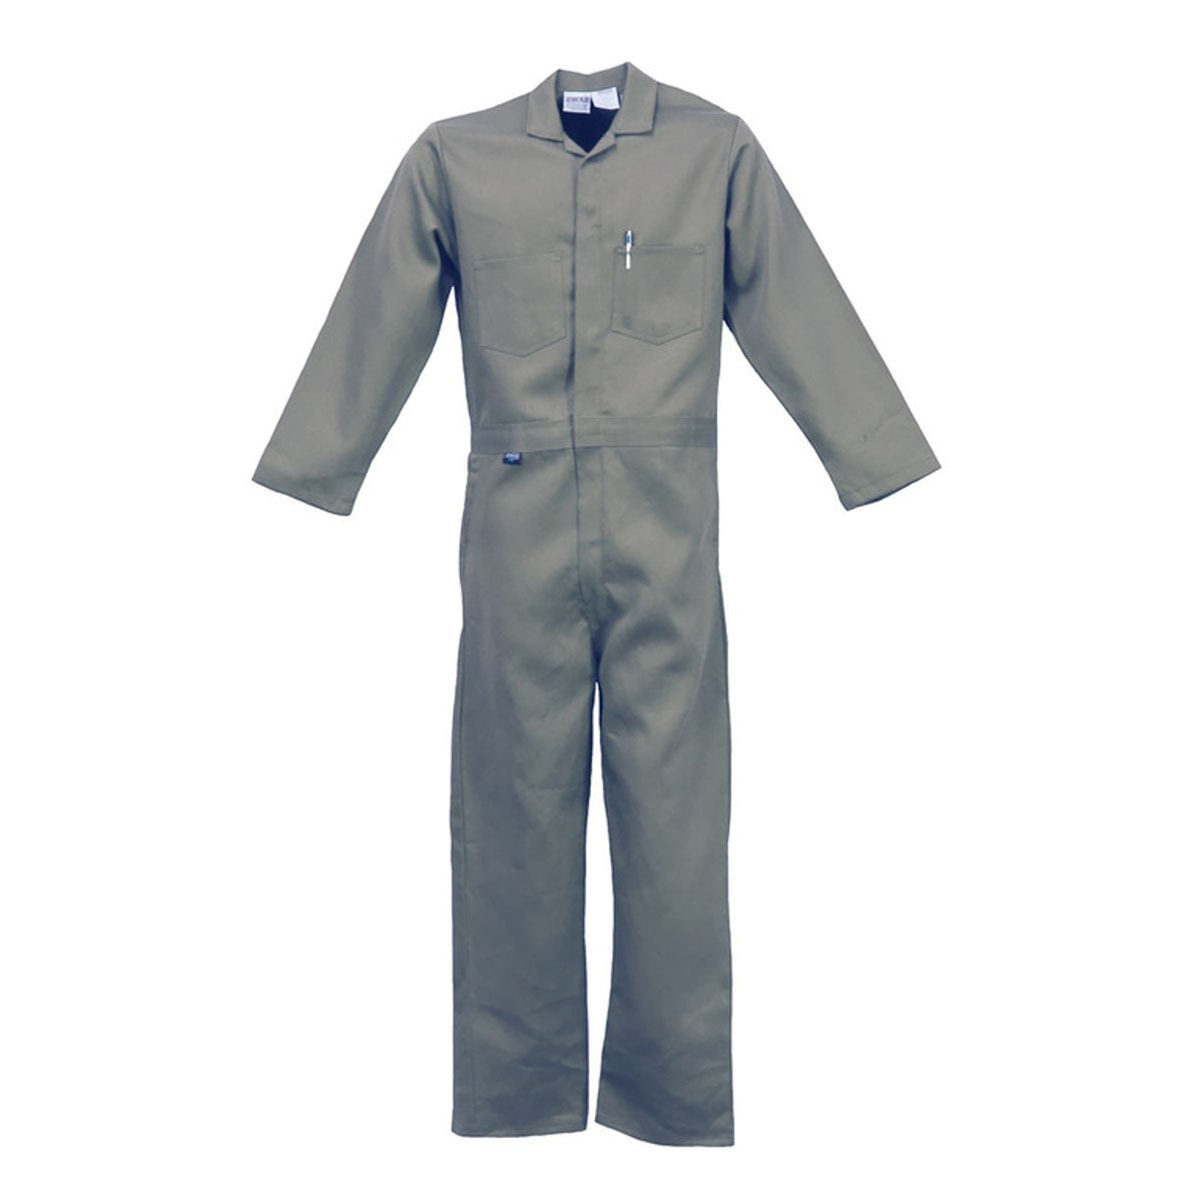 Stanco Safety Products™ Medium Gray Cotton Contractor Style Flame Resistant Coverall